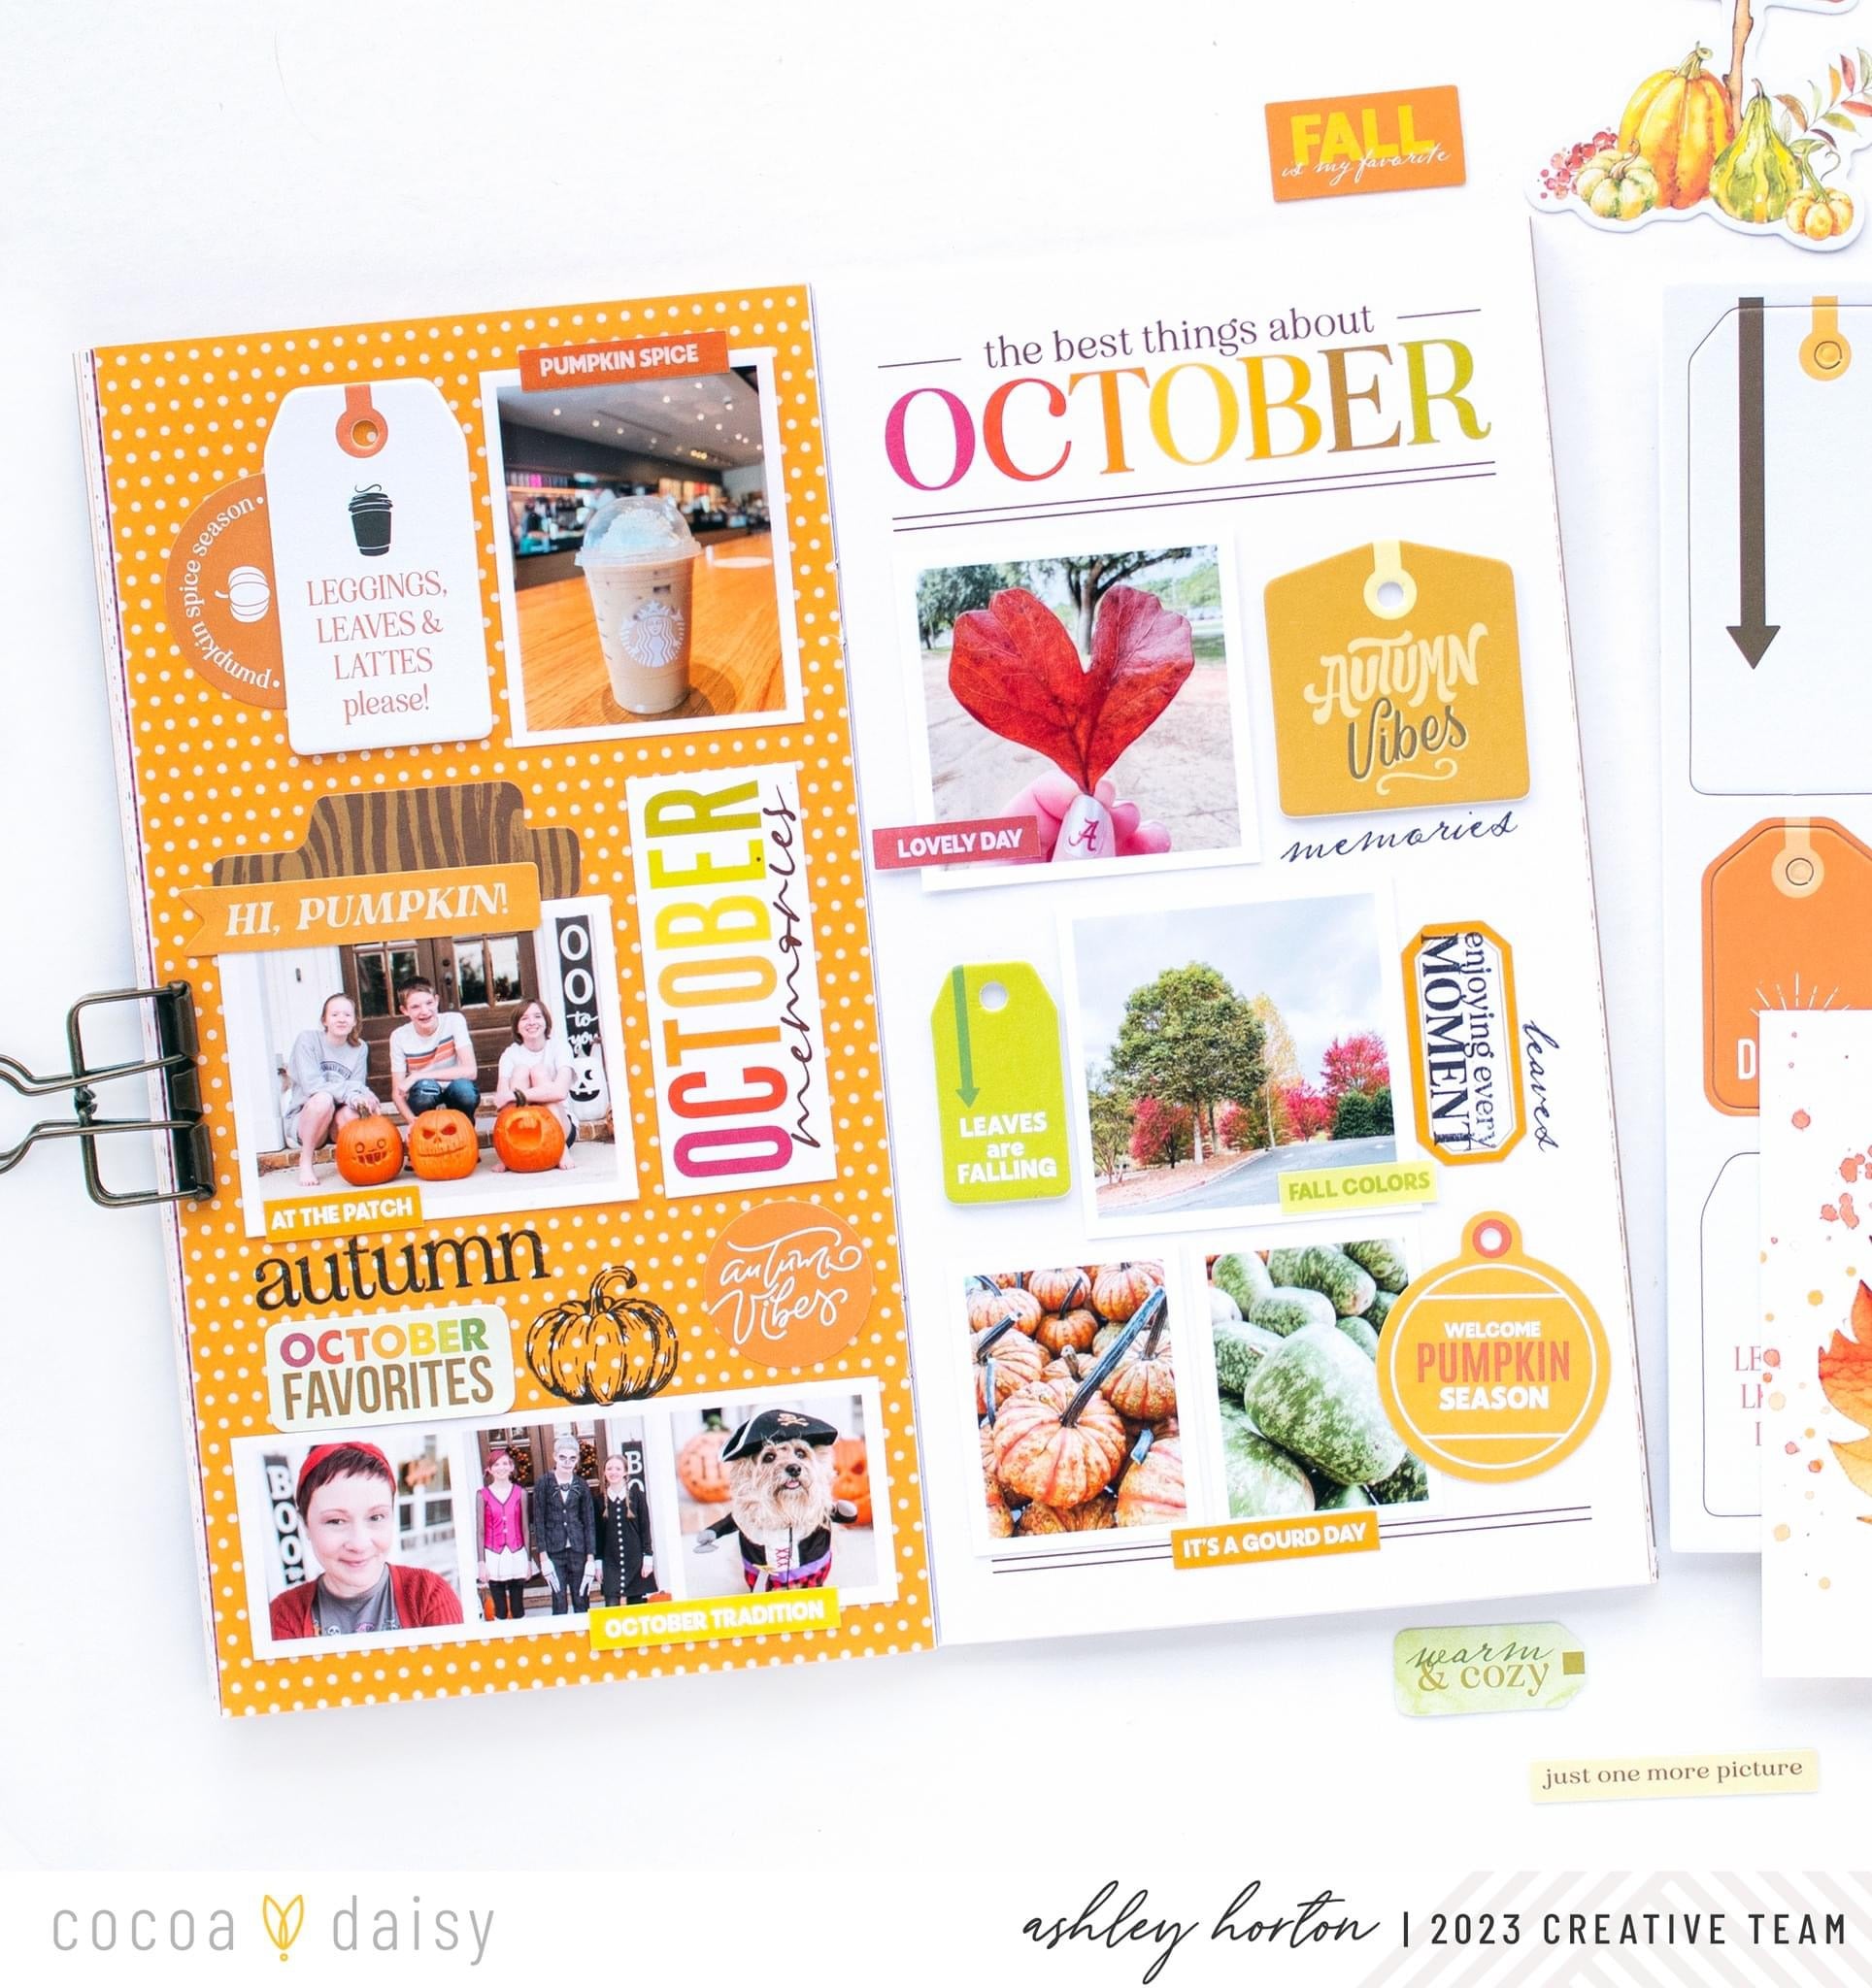 Fall Favorites Documented with Autumn Whispers!